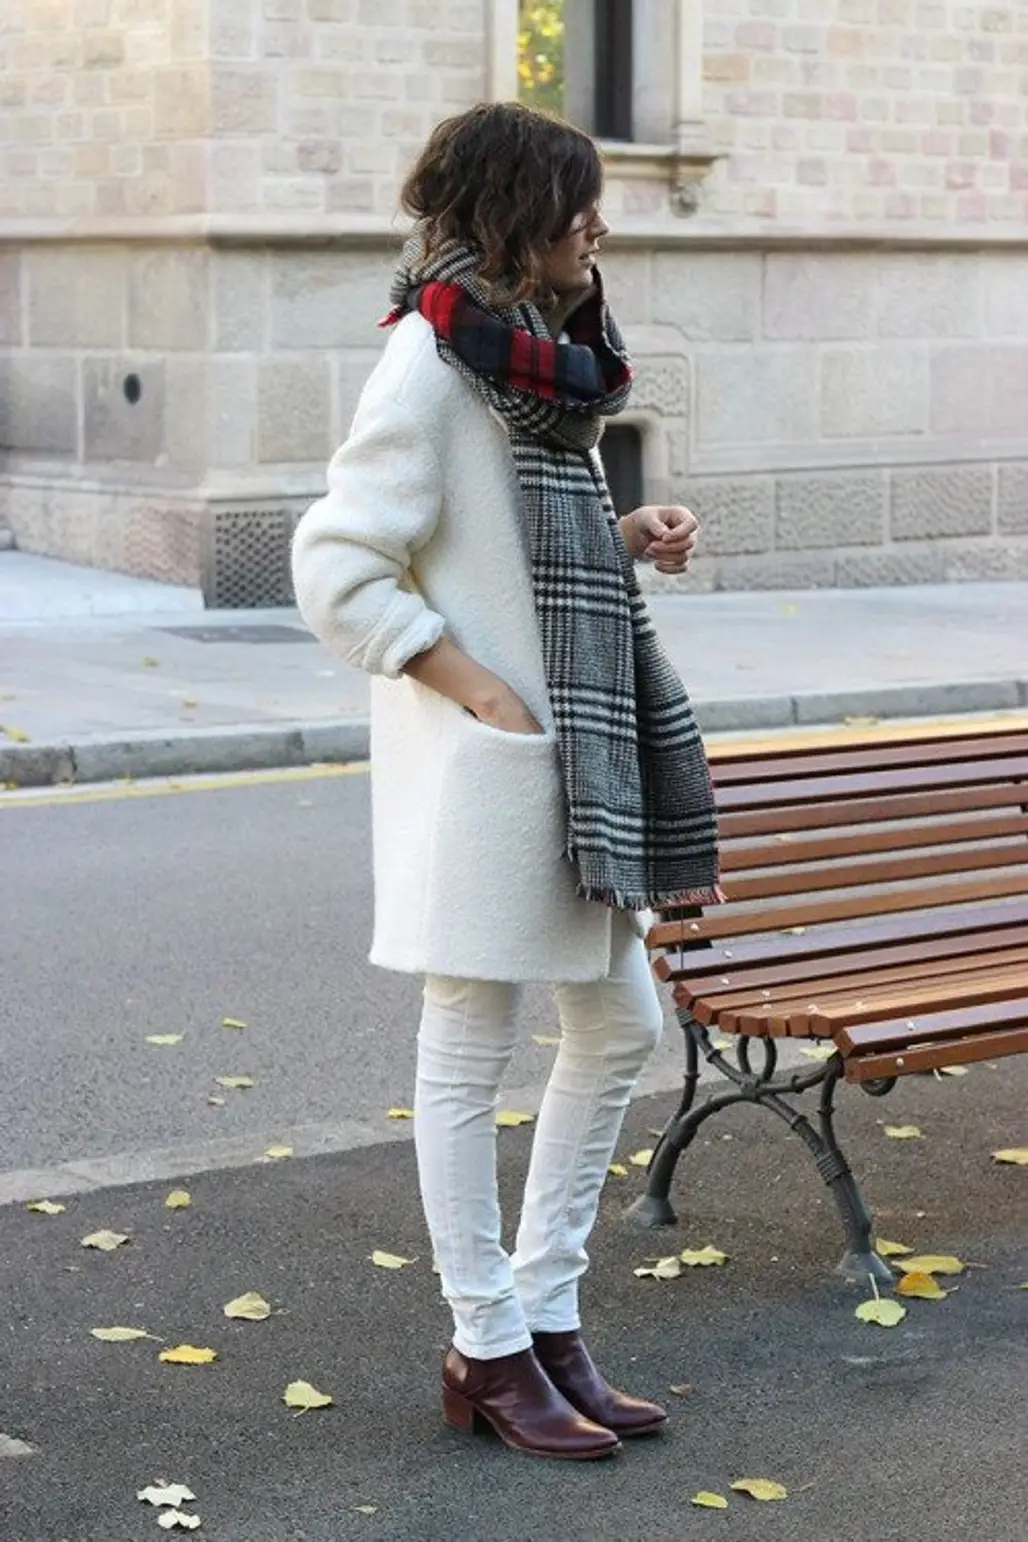 A Patterned Scarf Works Well with an All White Look